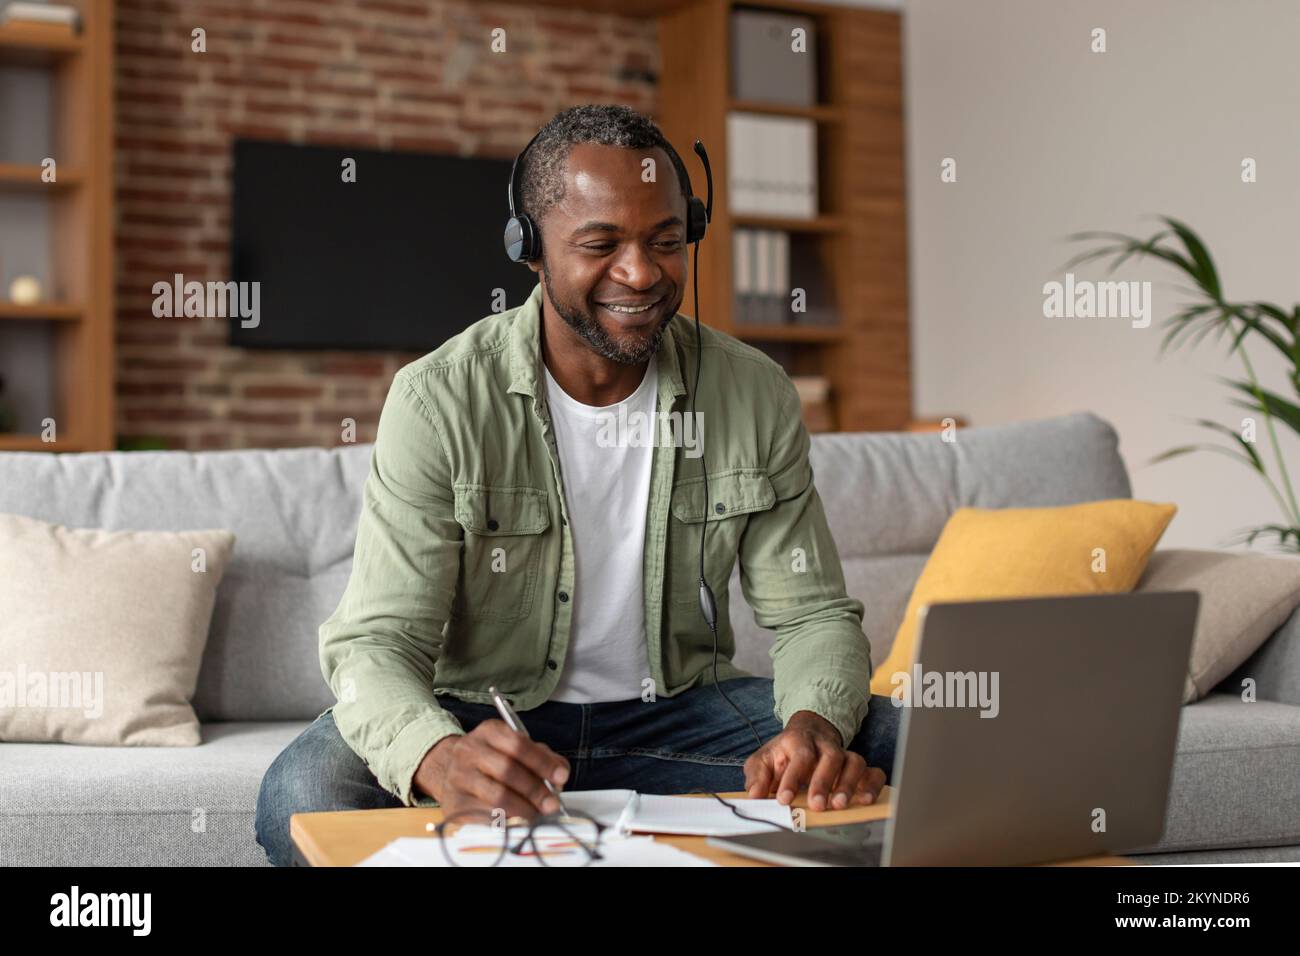 Smiling middle aged african american guy in headphones looks at laptop, makes notes in living room interior Stock Photo